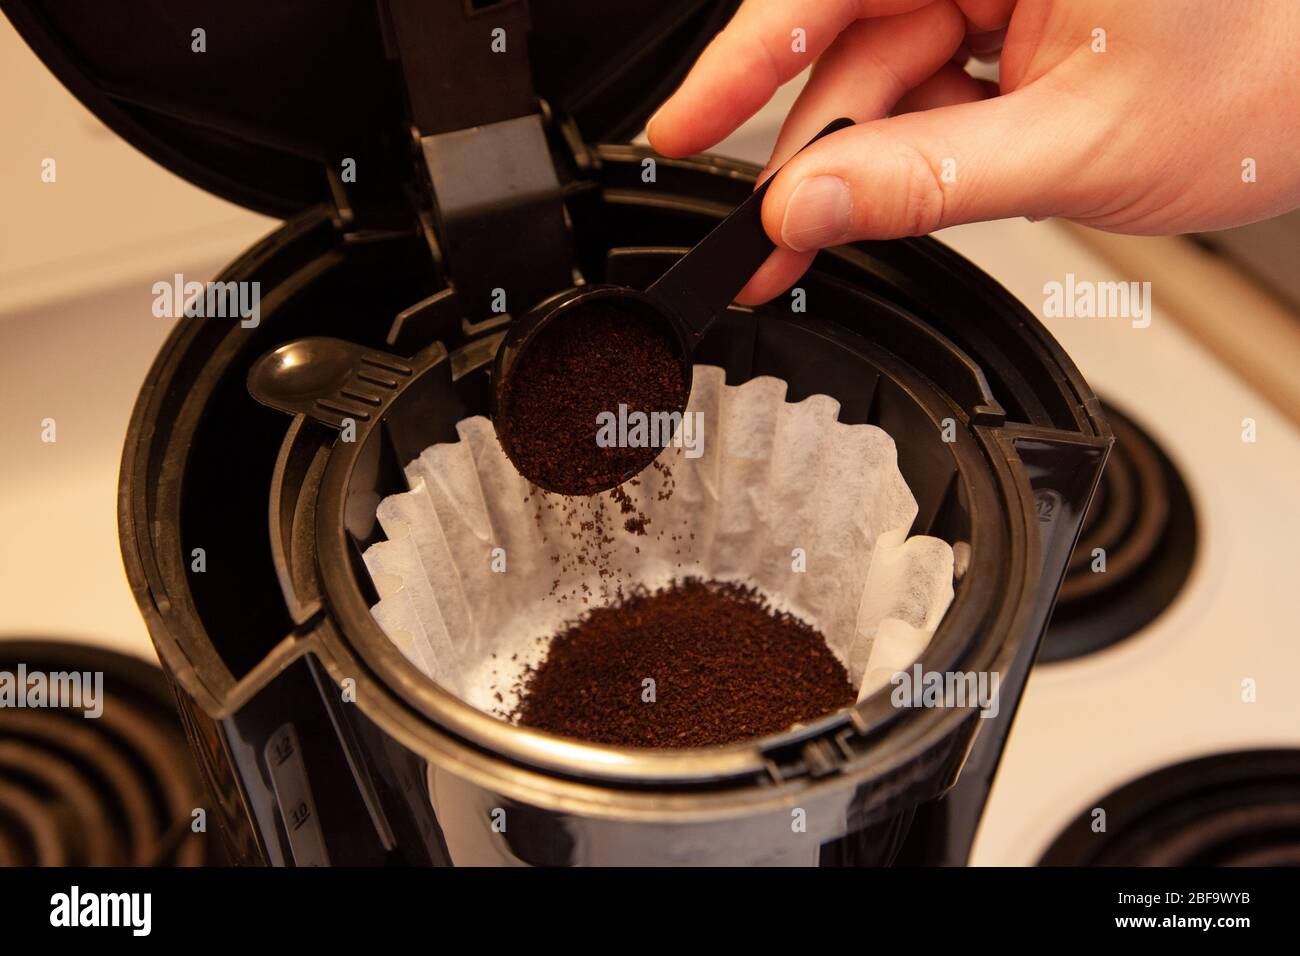 pouring a scoop of coffee grinds into a paper filter in a coffee maker Stock Photo